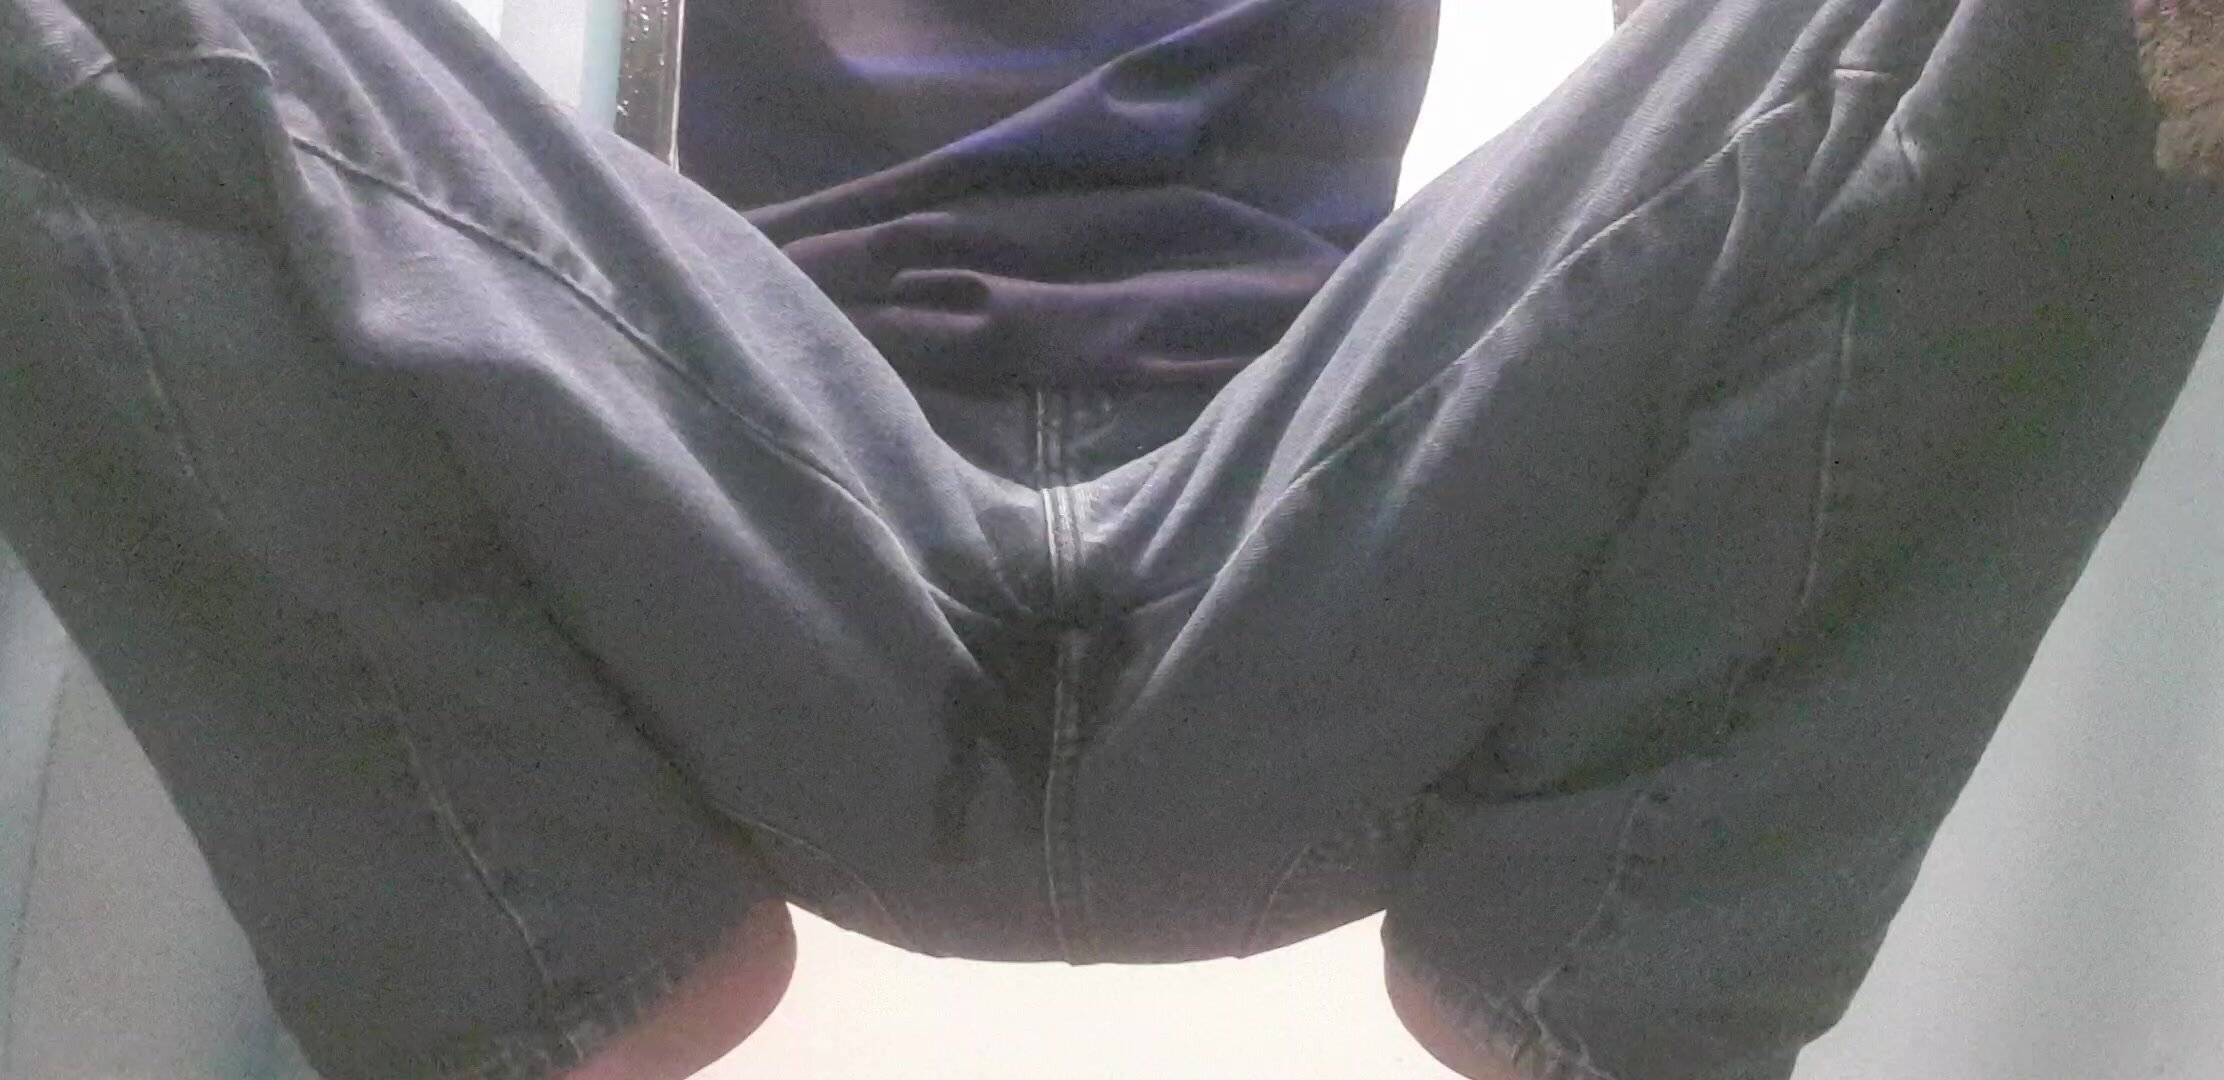 PIssing my baggy jeans